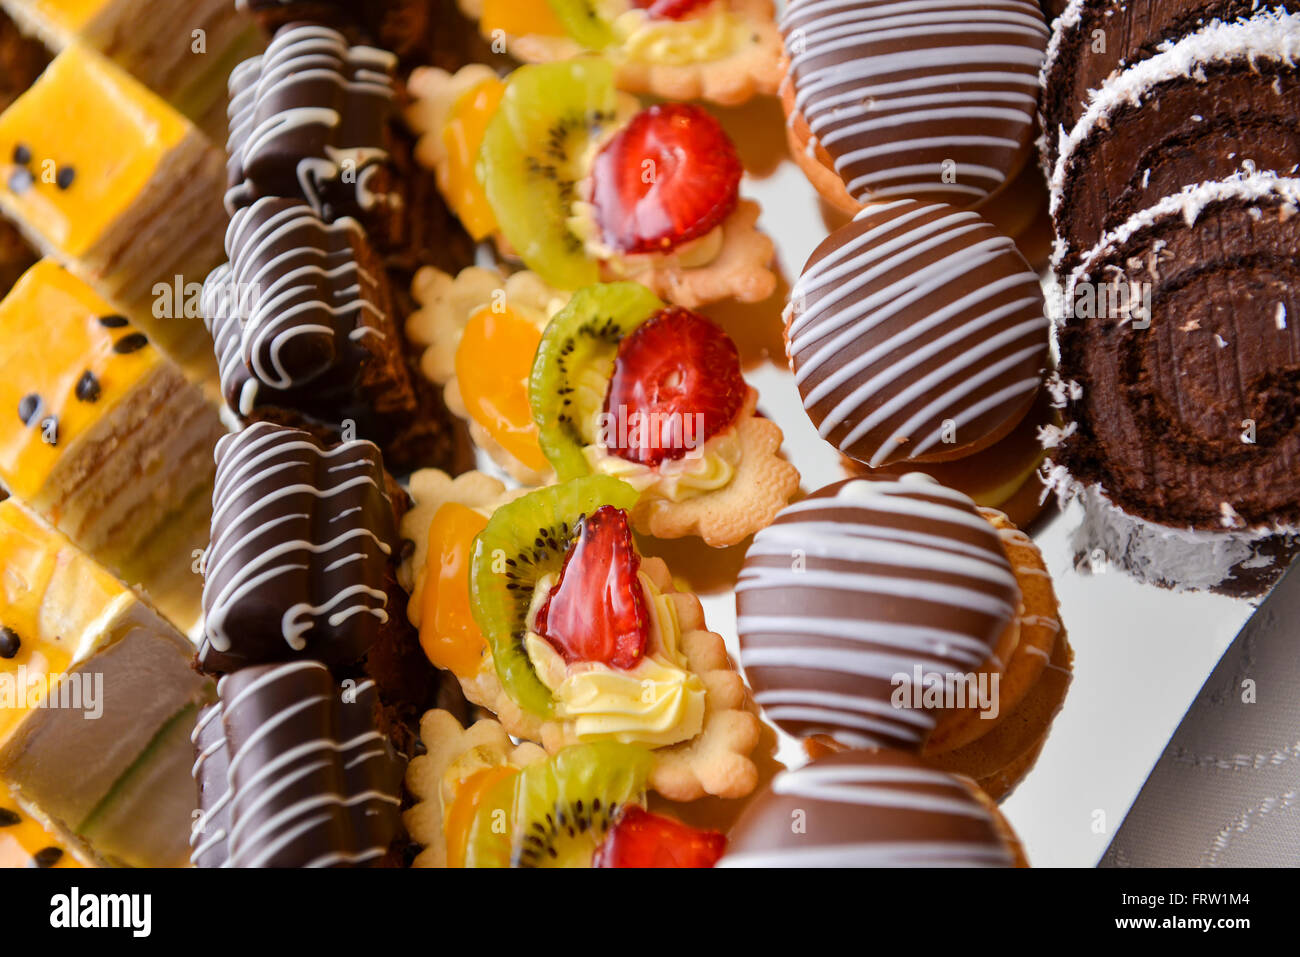 Different type of cakes on a plate and with side light Stock Photo